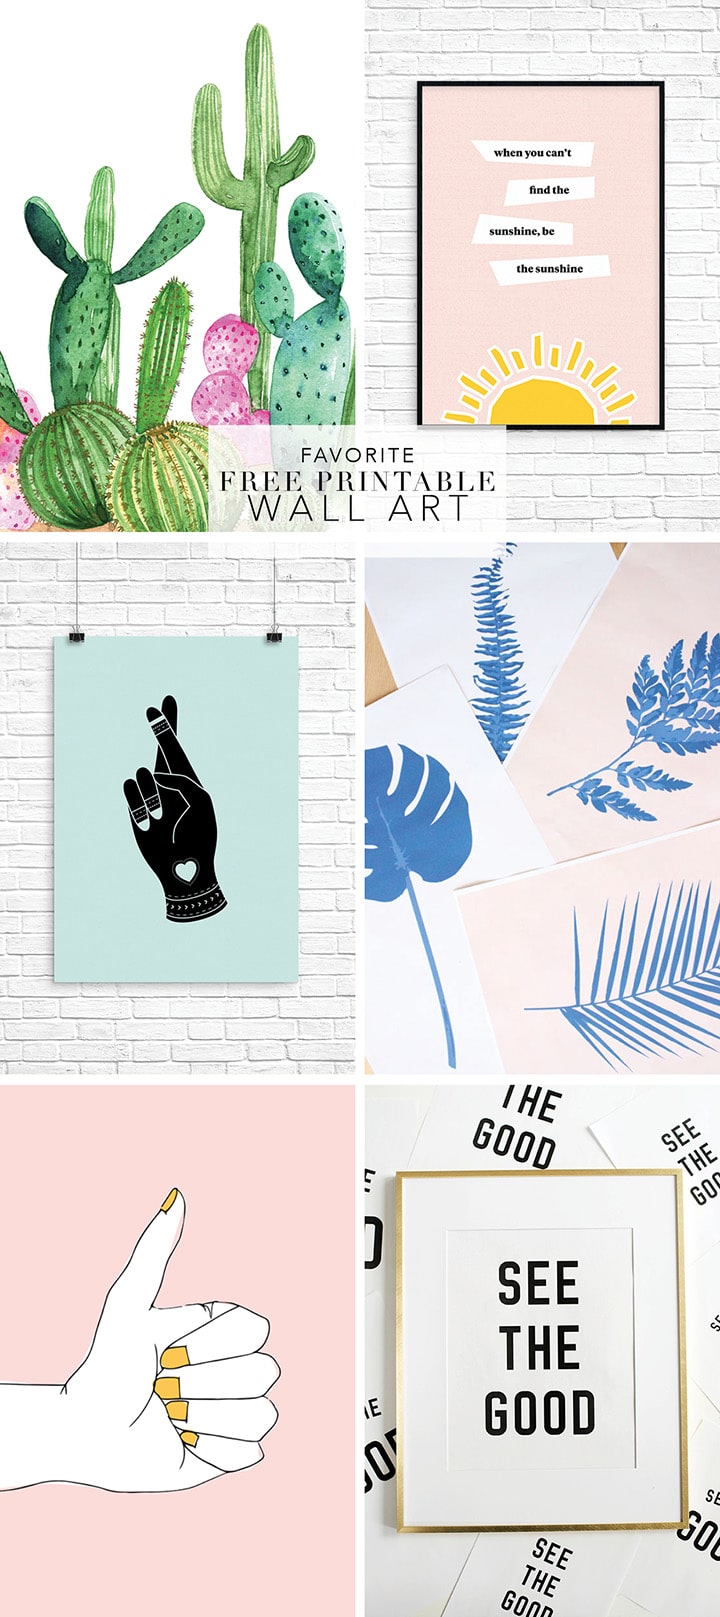 A roundup of our favorite free printable wall art.